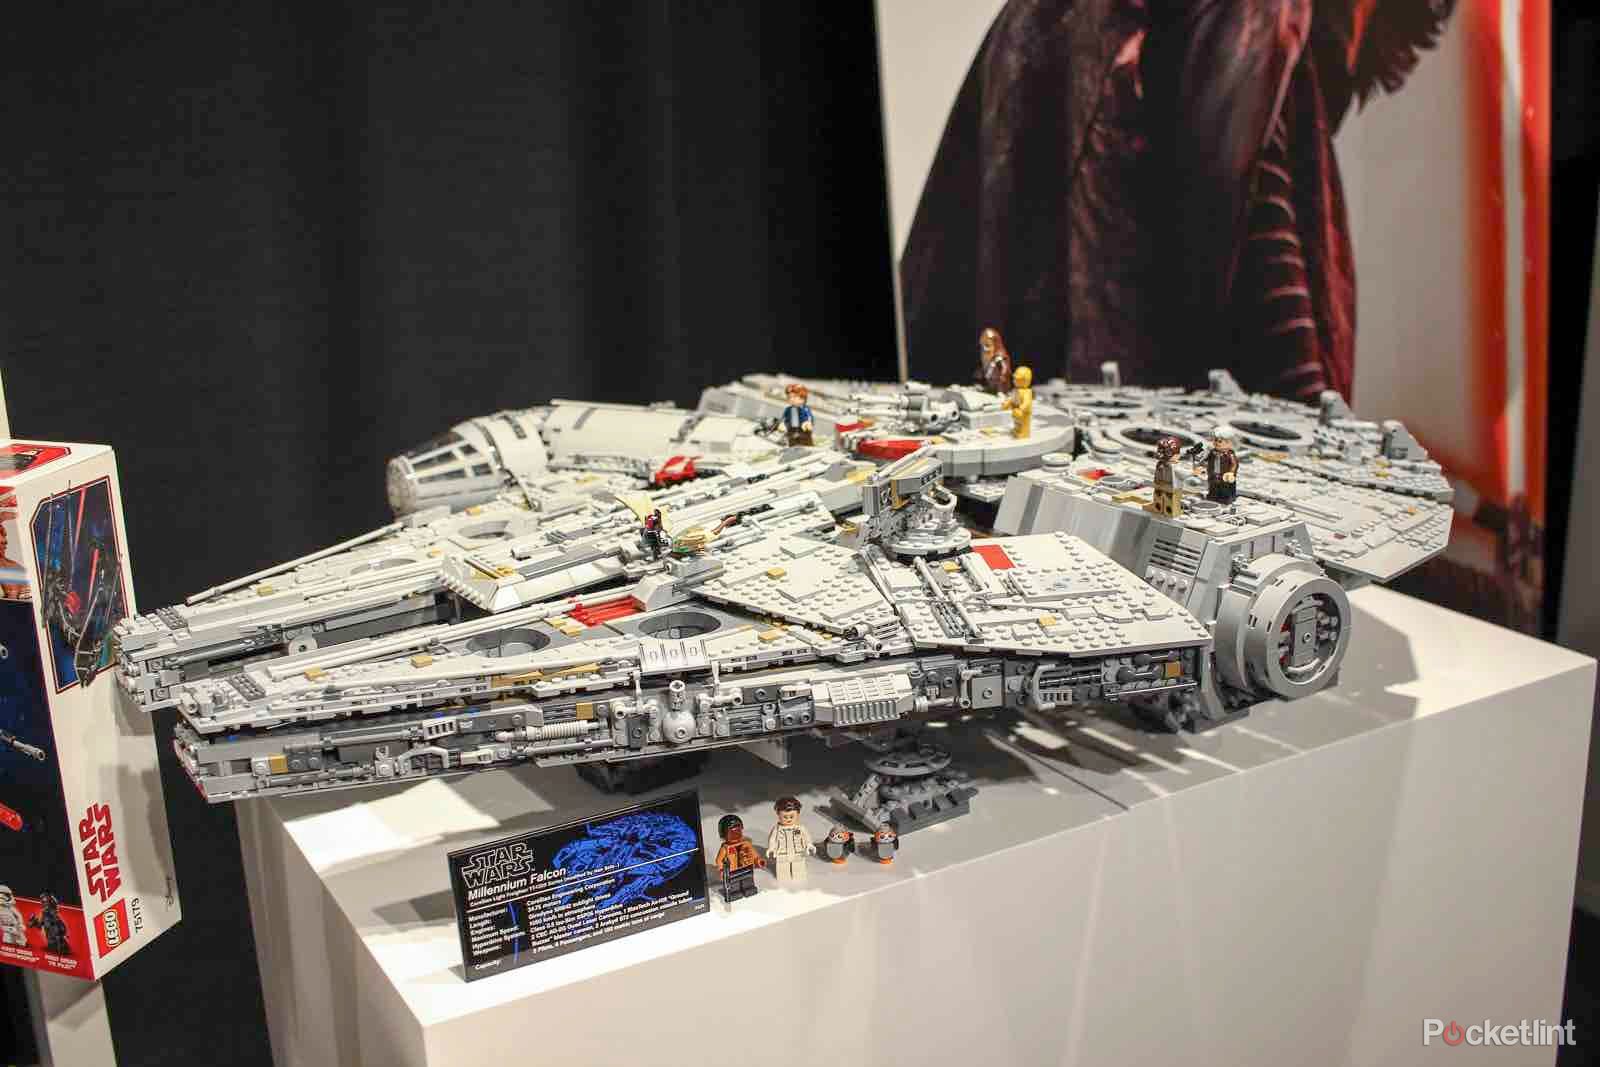 Ultimate Collector Series Lego Millennium Falcon in pictures all 7541 pieces of it image 1